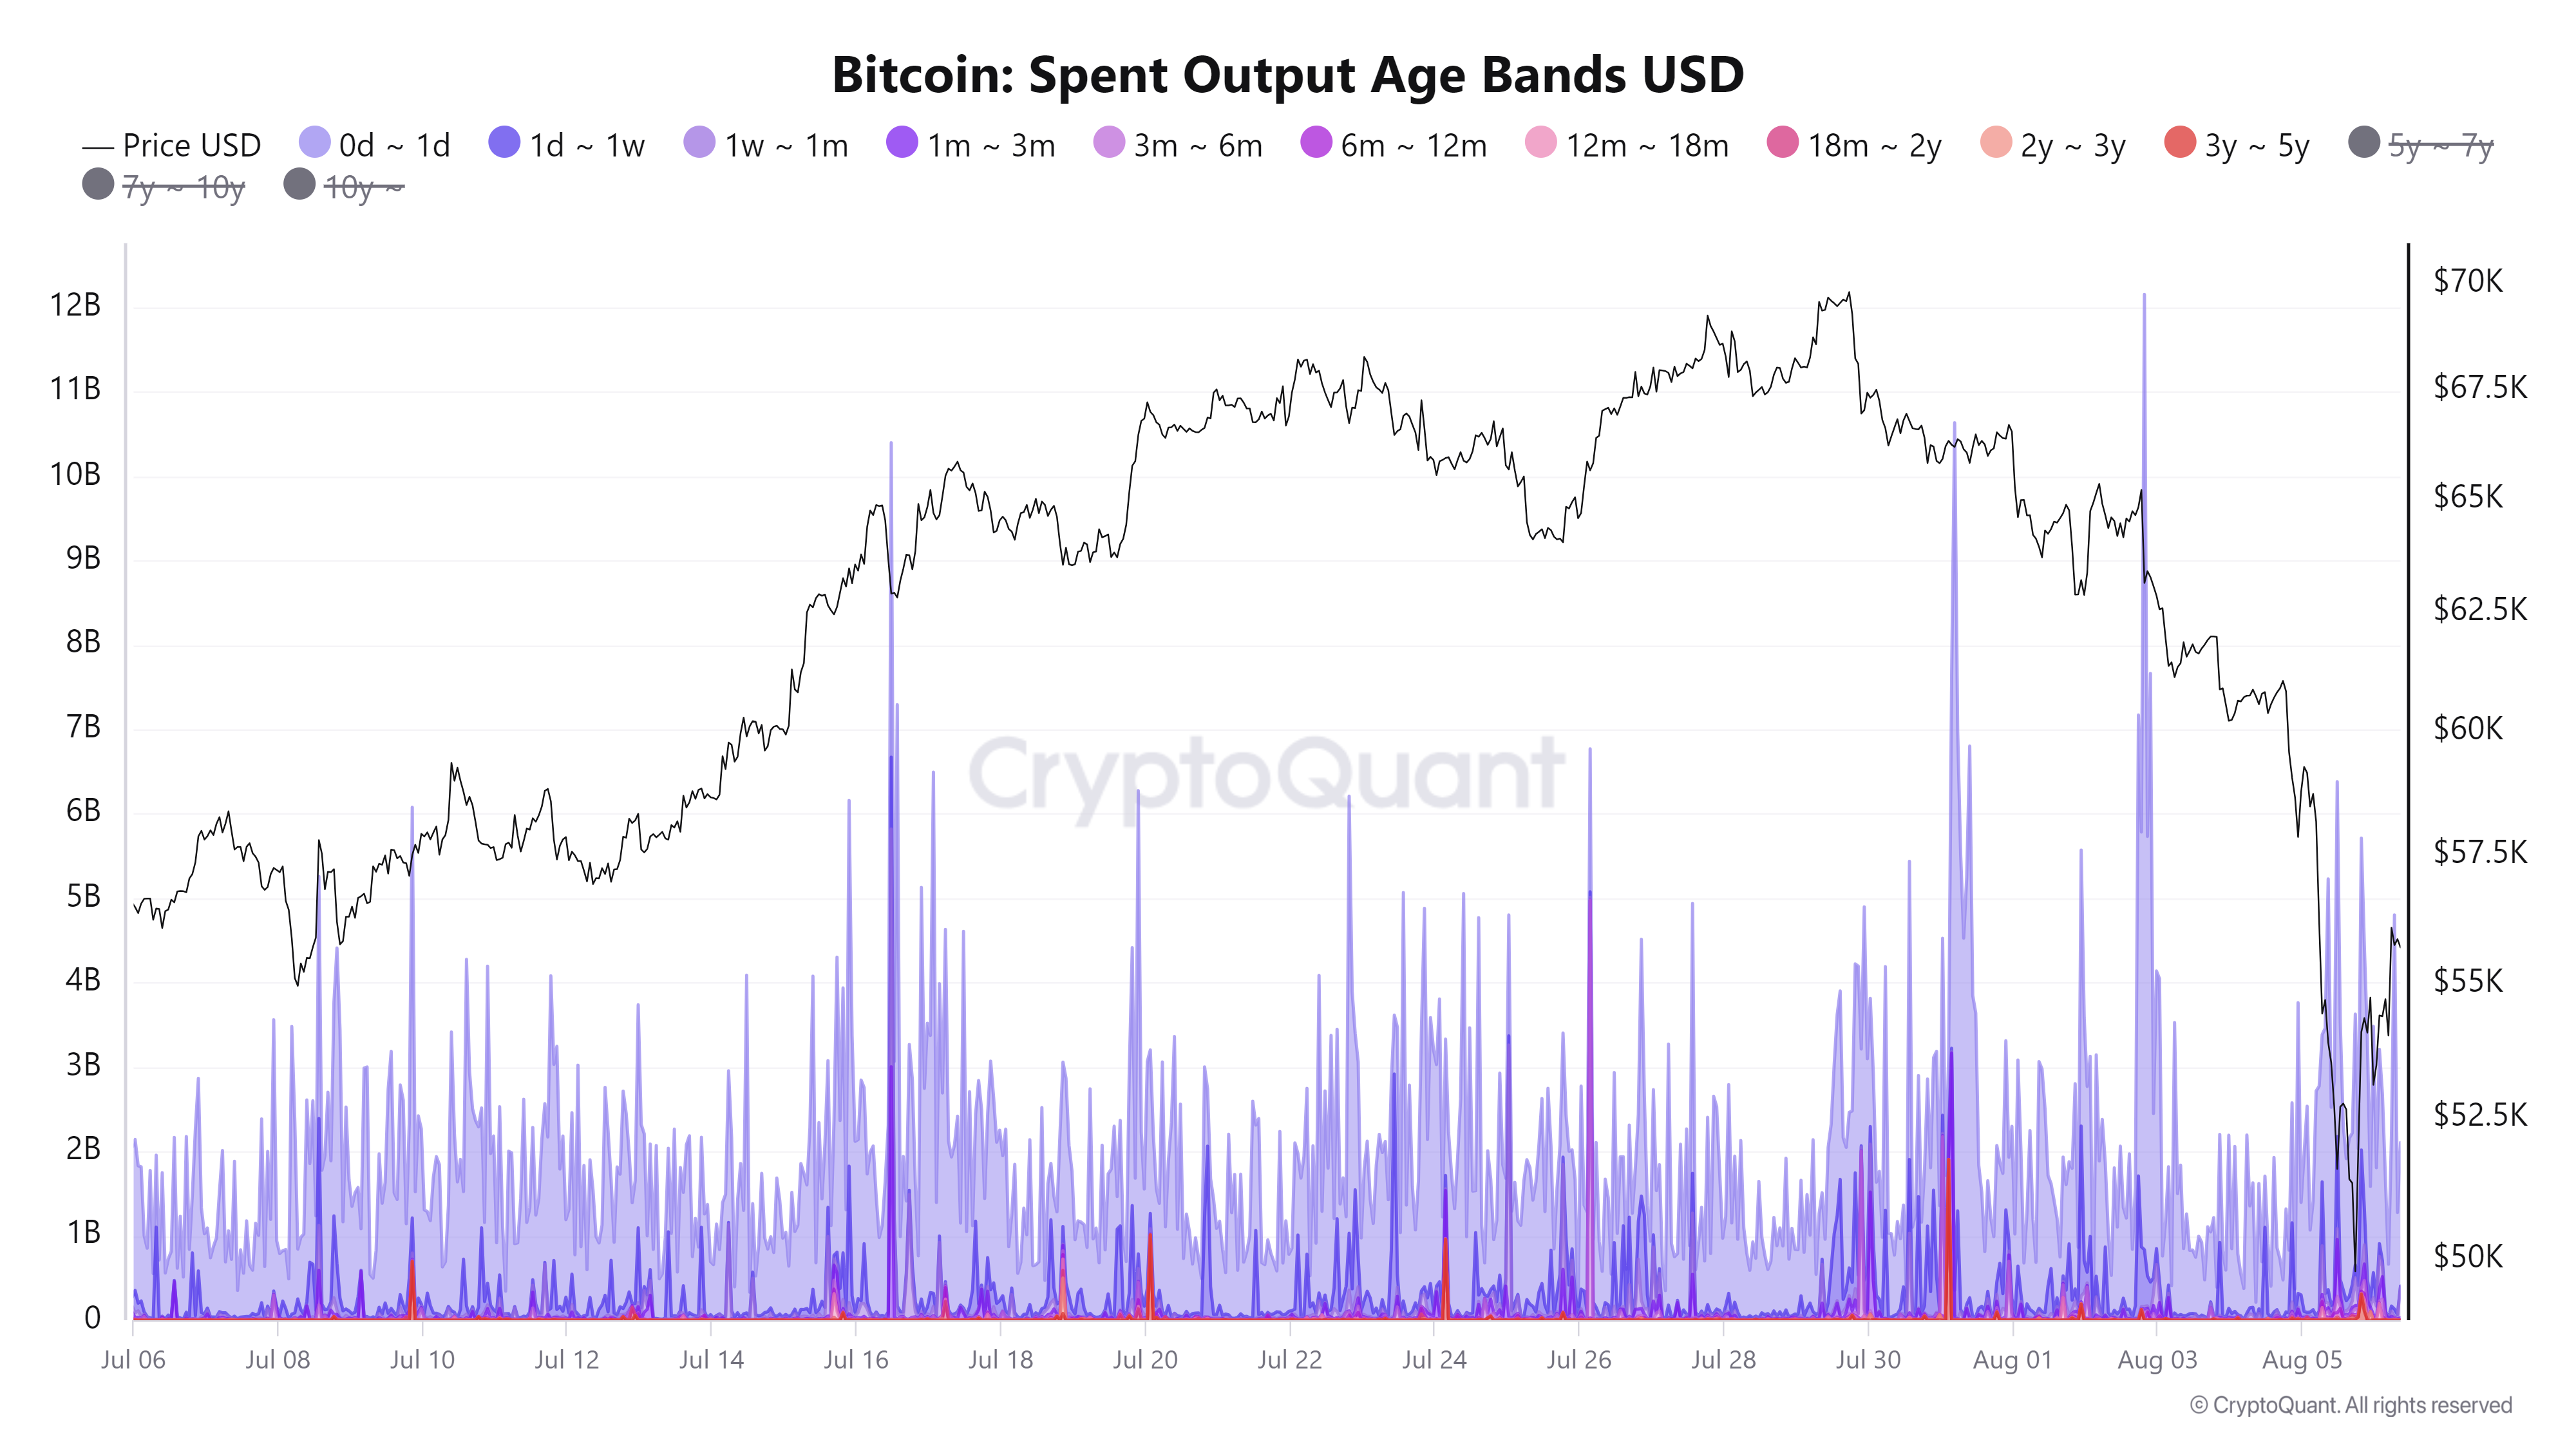 Bitcoin Spent Output Age Bands USD chart